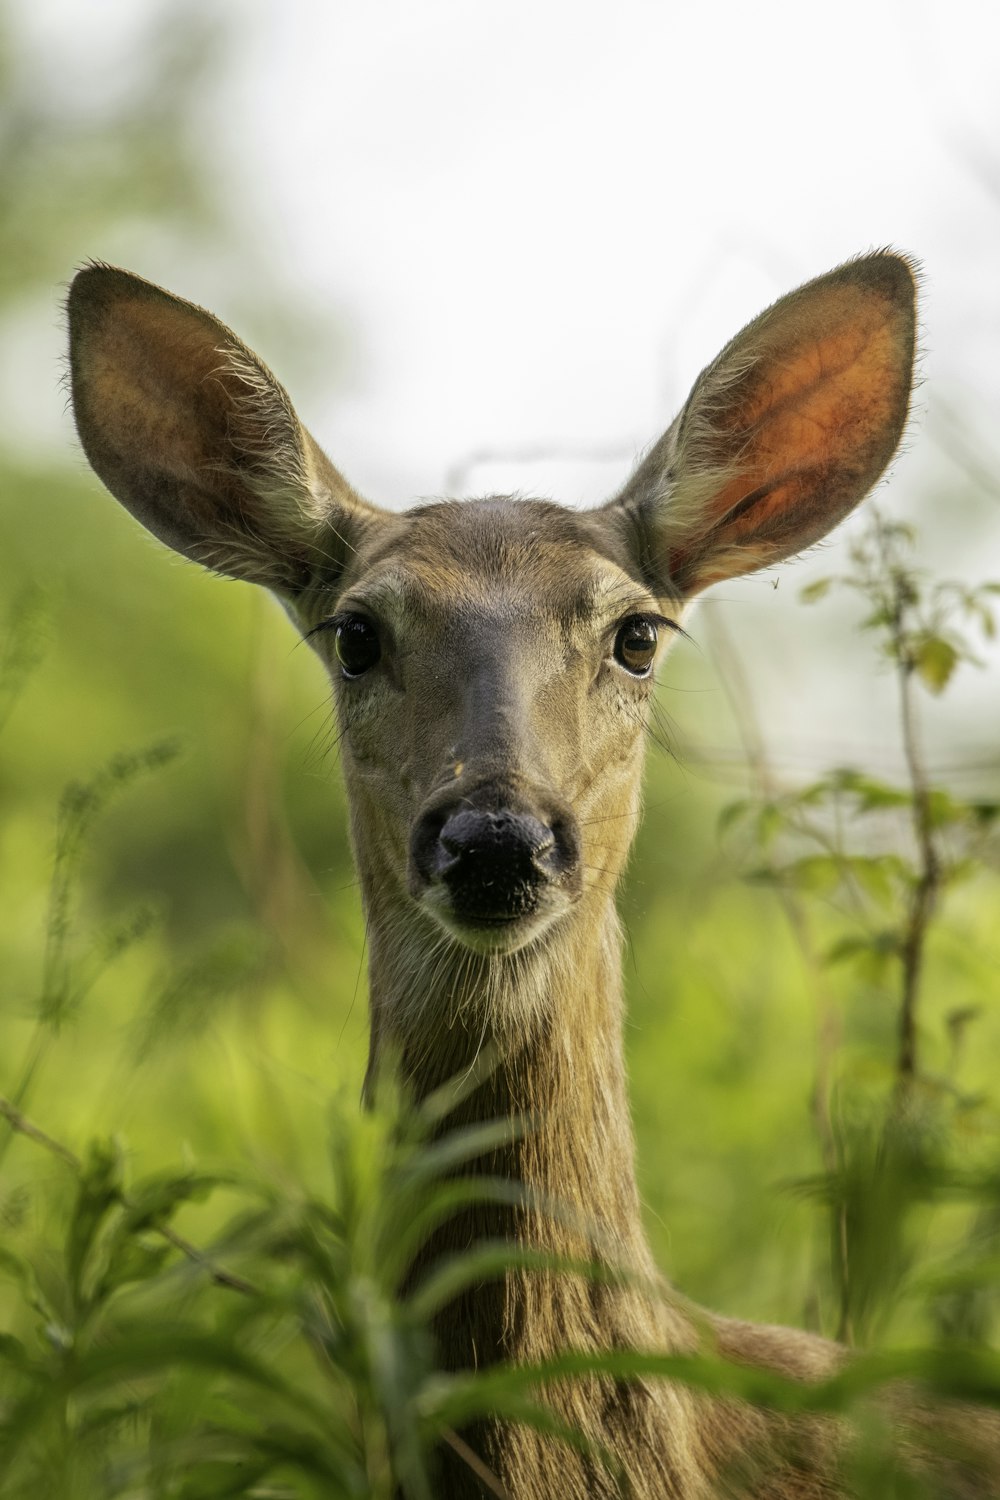 a deer with a long neck